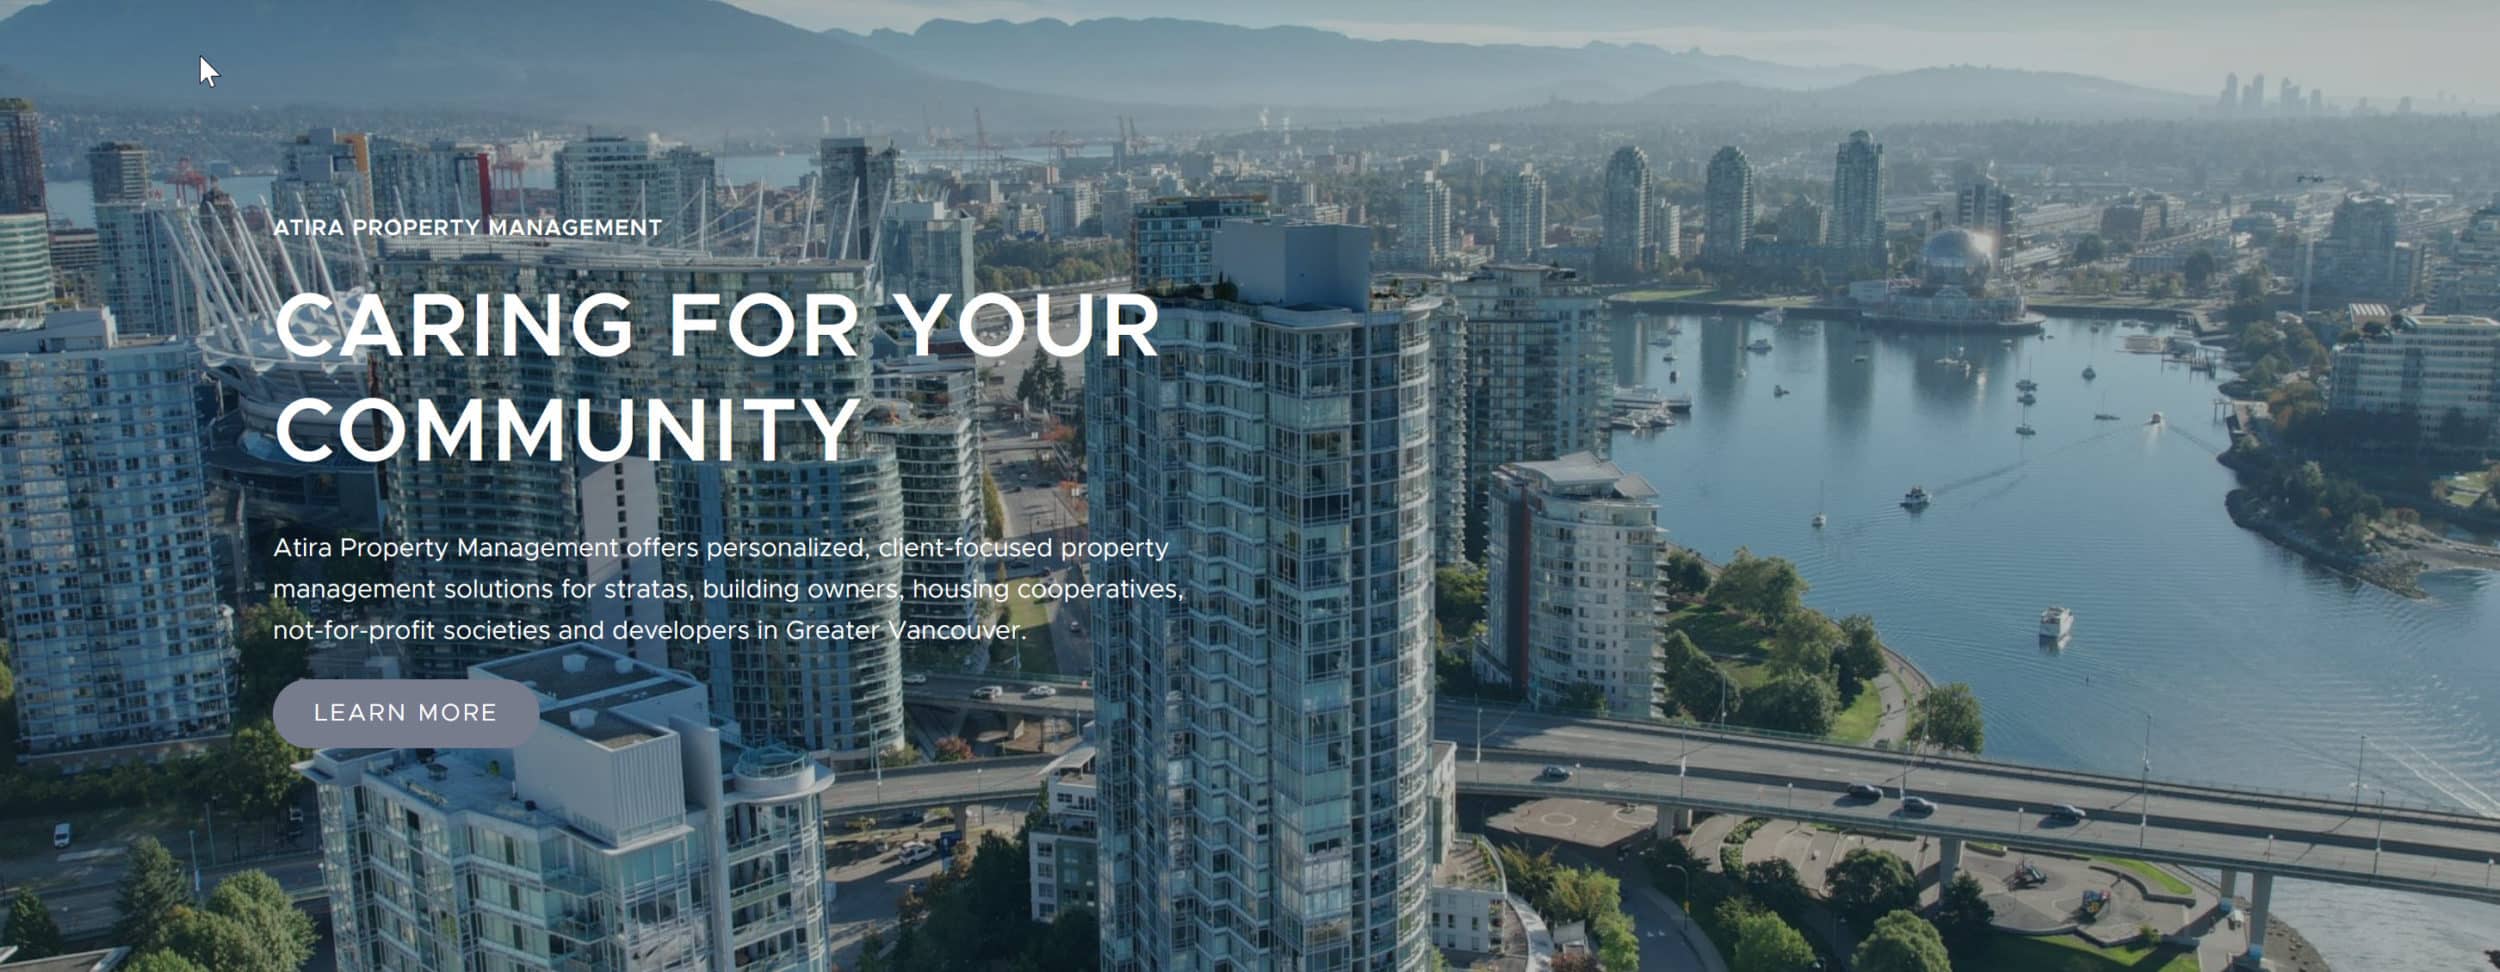 PMI banner - Vancouver from the air